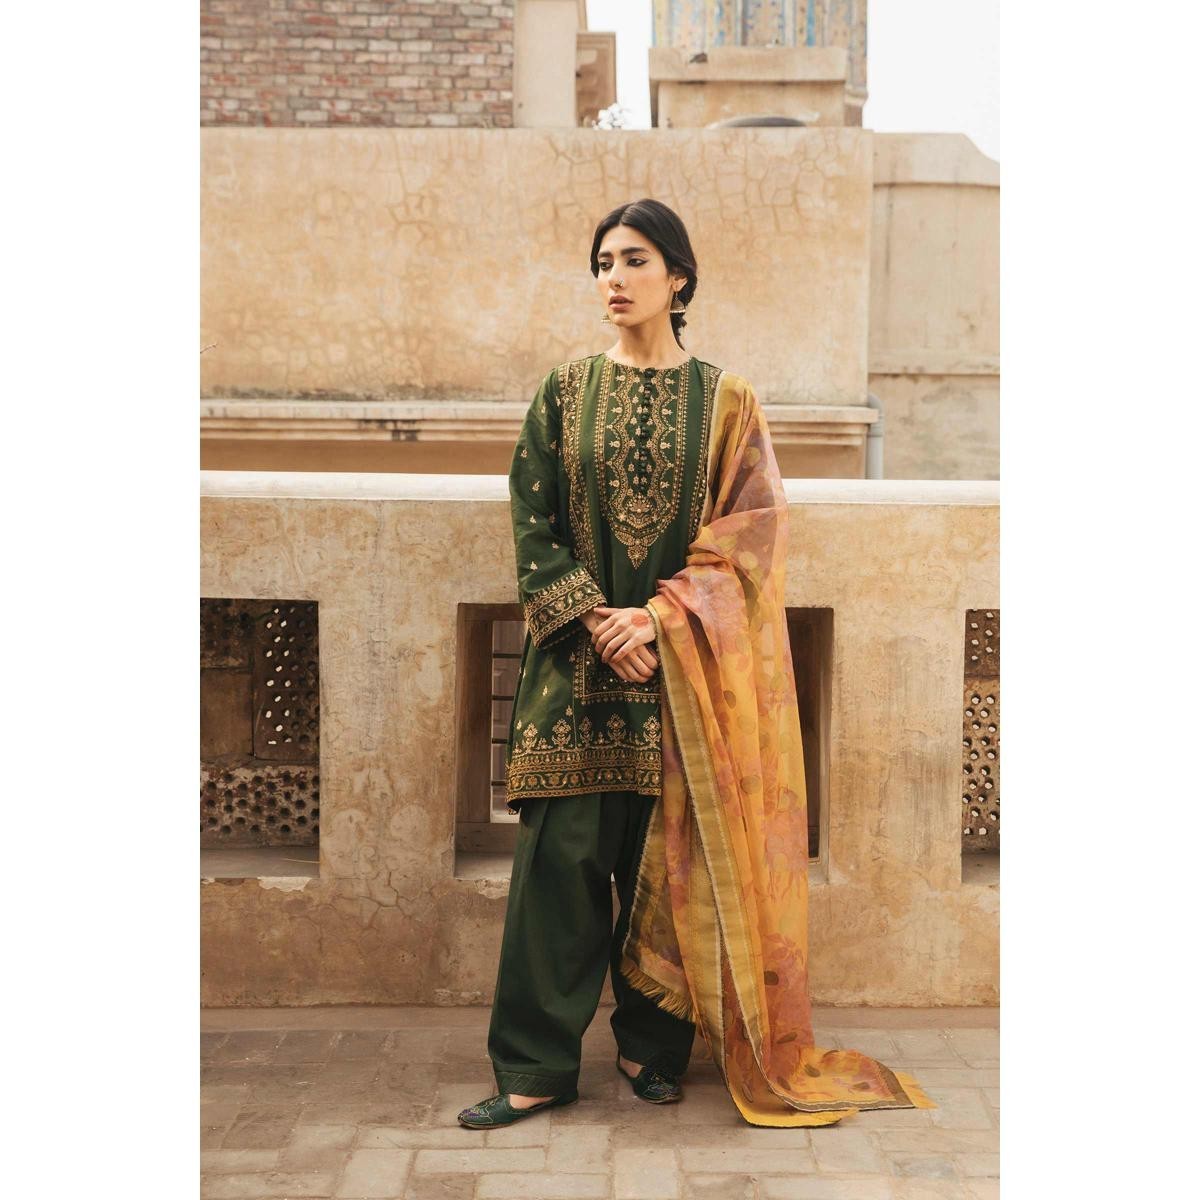 /2023/01/zara-shahjahan-fall-collection-3-piece-unstitched-suit-for-women--naaz-a-image1.jpeg